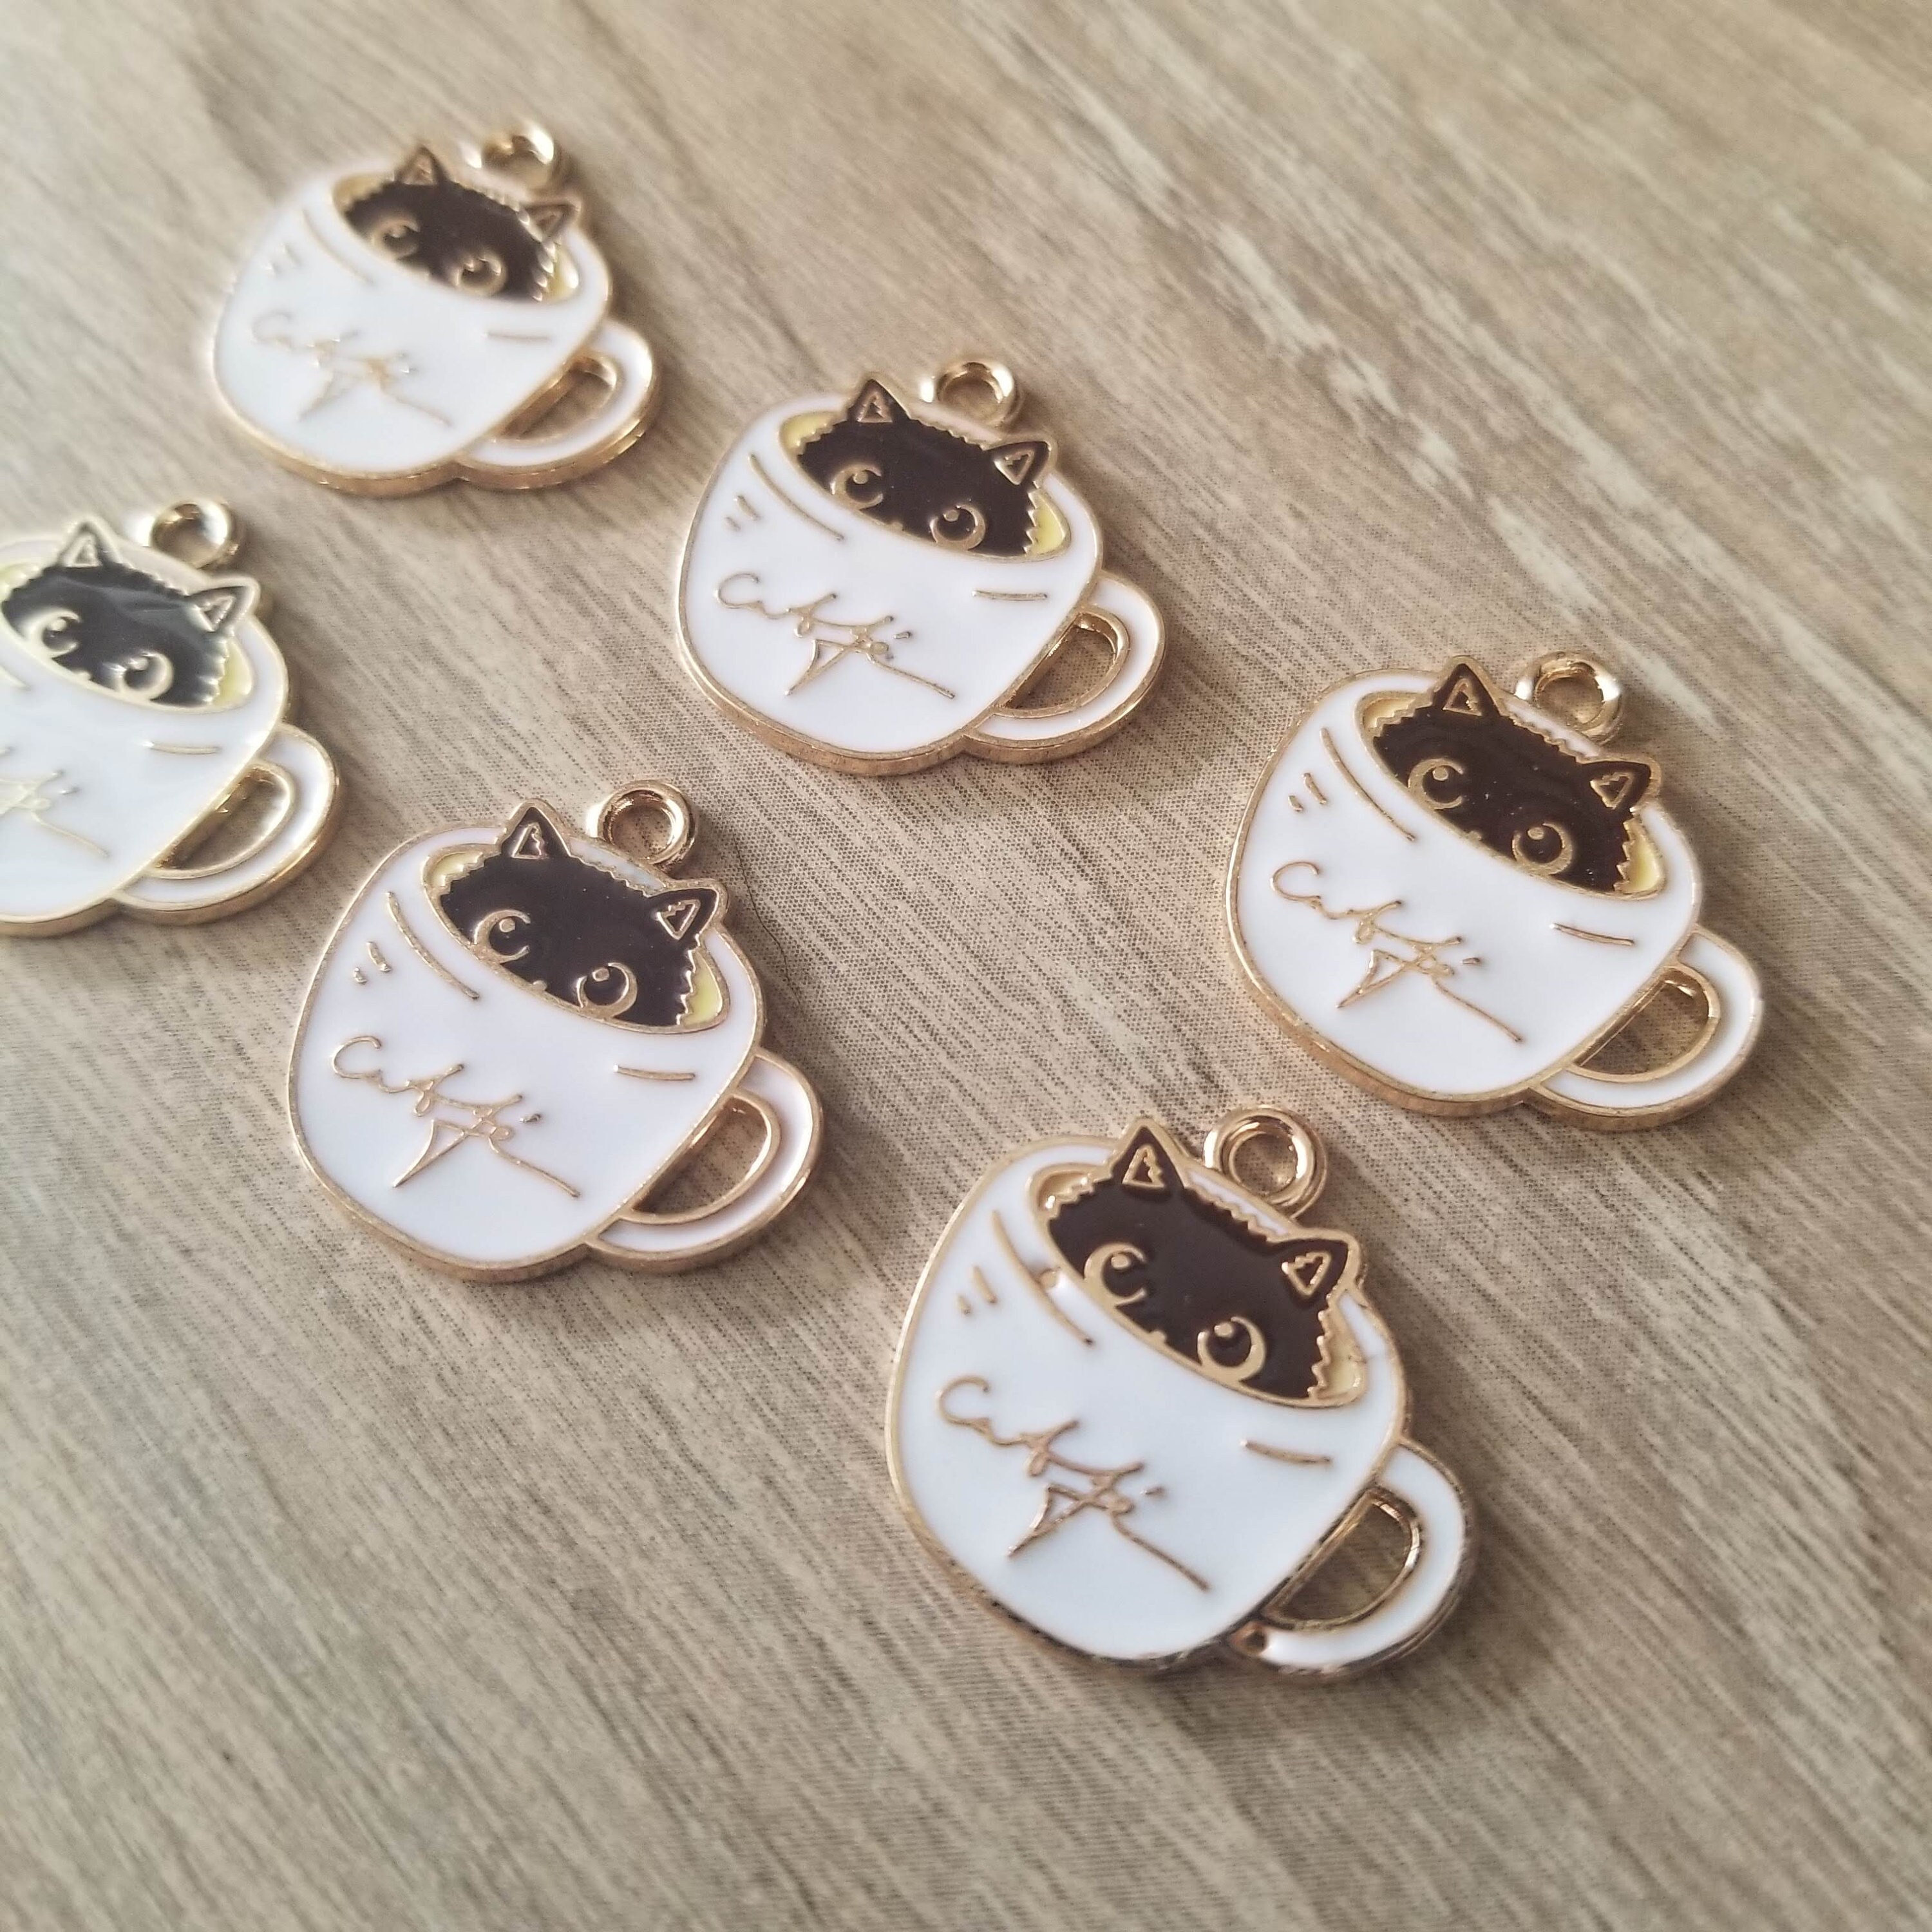 20 pcs Gold Plated Enamel Flower Cat Charms Pendant for Jewelry Making  Necklace Bracelet Earring and Slime DIY Jewelry Accessories Charms (M451)